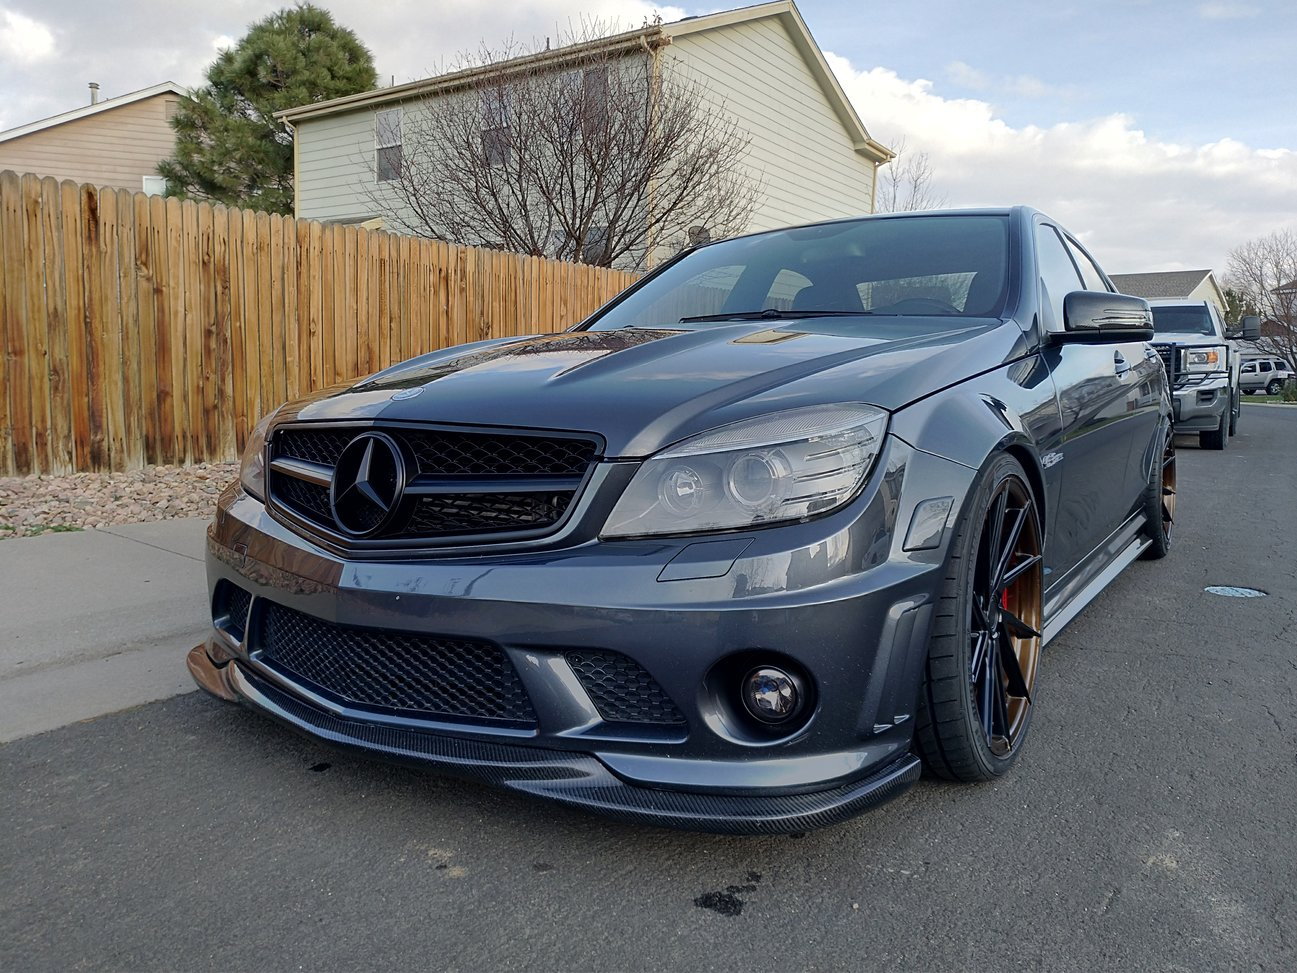 Wheels and Tires/Axles - Stance SF01 19x9.5 Wheels for W204. Matte Black Center, Brushed Bronze Lip/Barrels - New - 2008 to 2014 Mercedes-Benz C63 AMG - 2008 to 2014 Mercedes-Benz C300 - Denver, CO 80233, United States